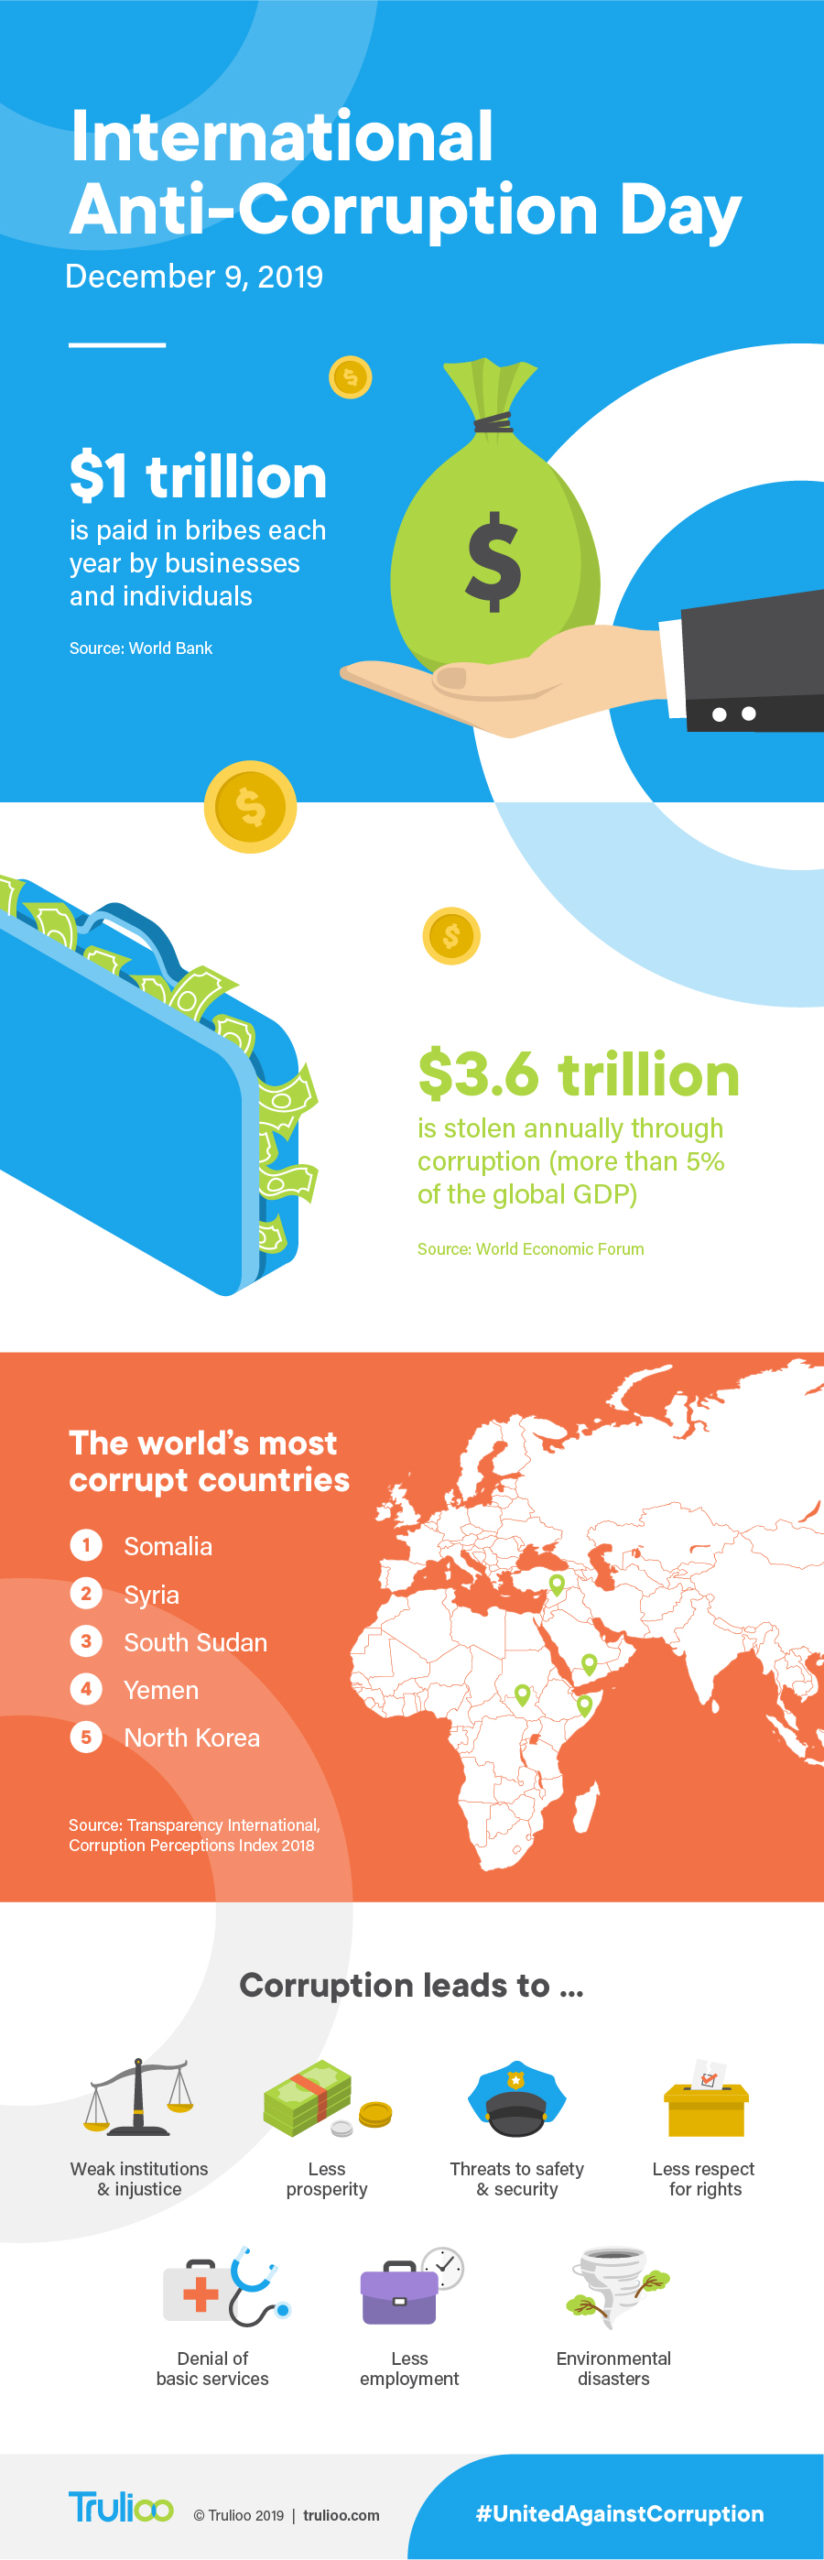 December 9 is International Anti-Corruption Day. This infographic provides stats about the extent of corruption throughput the world.